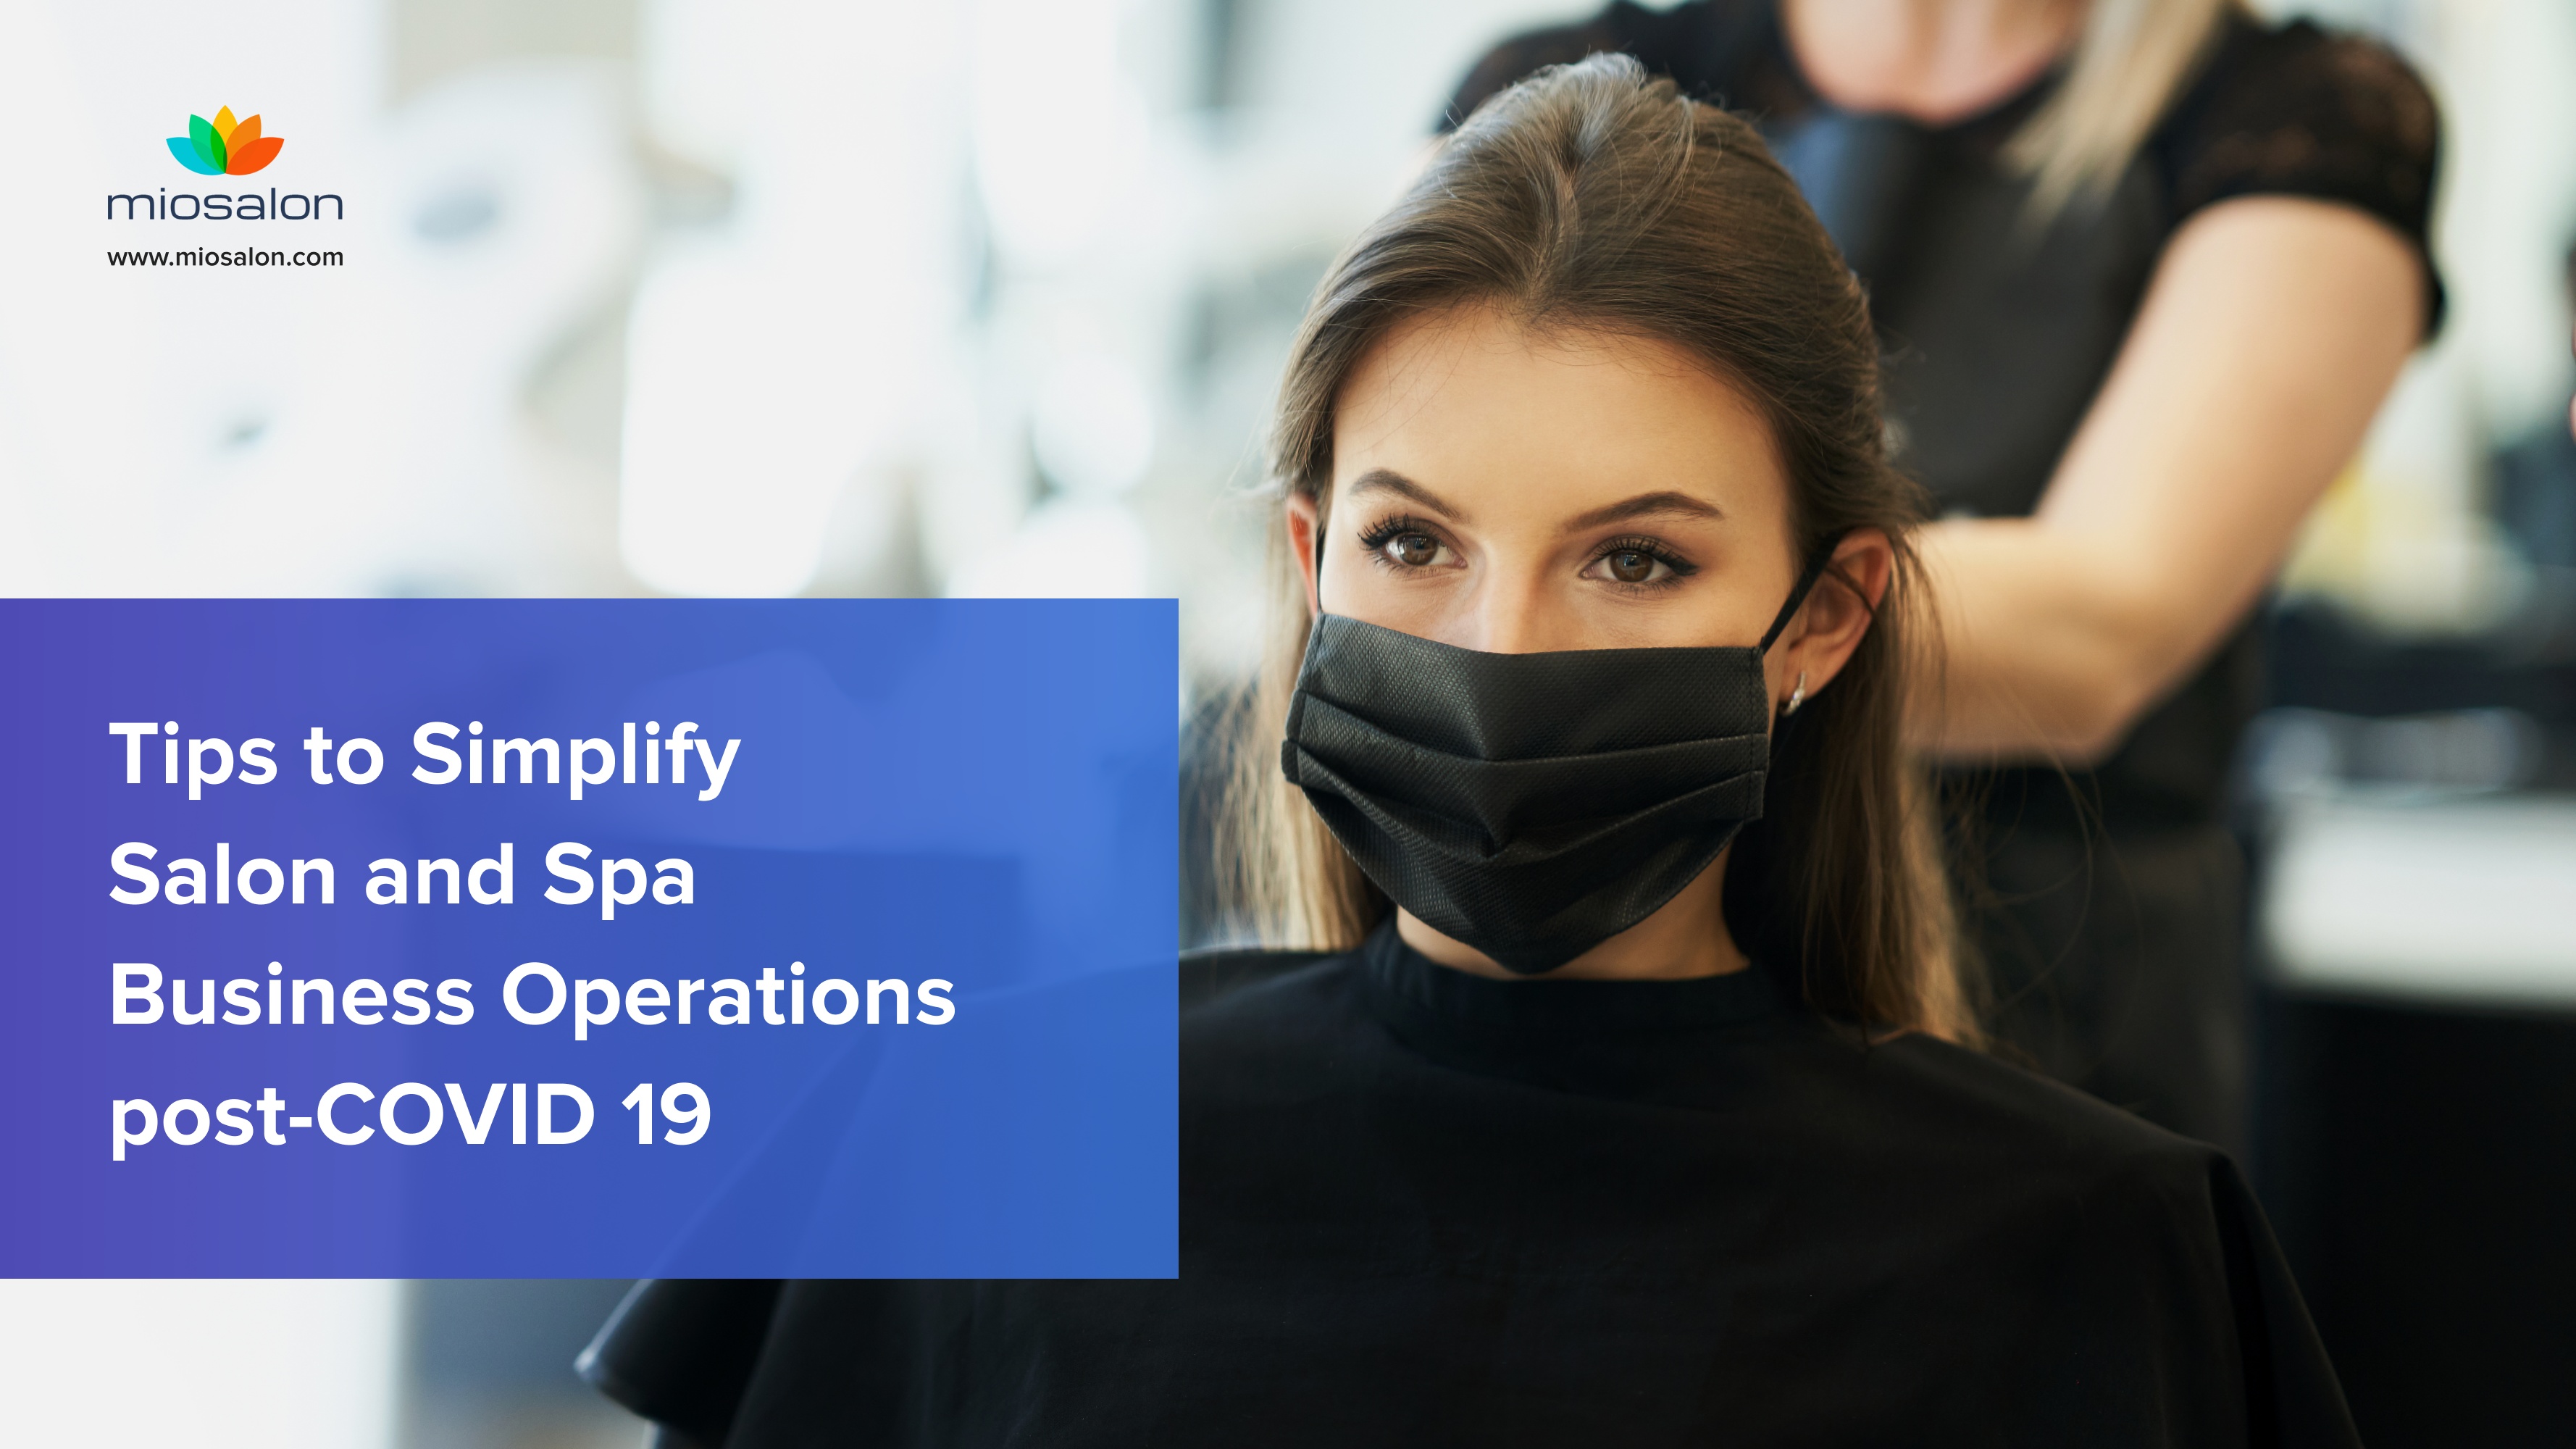 Tips to Simplify Salon and Spa Business Operations post-COVID 19